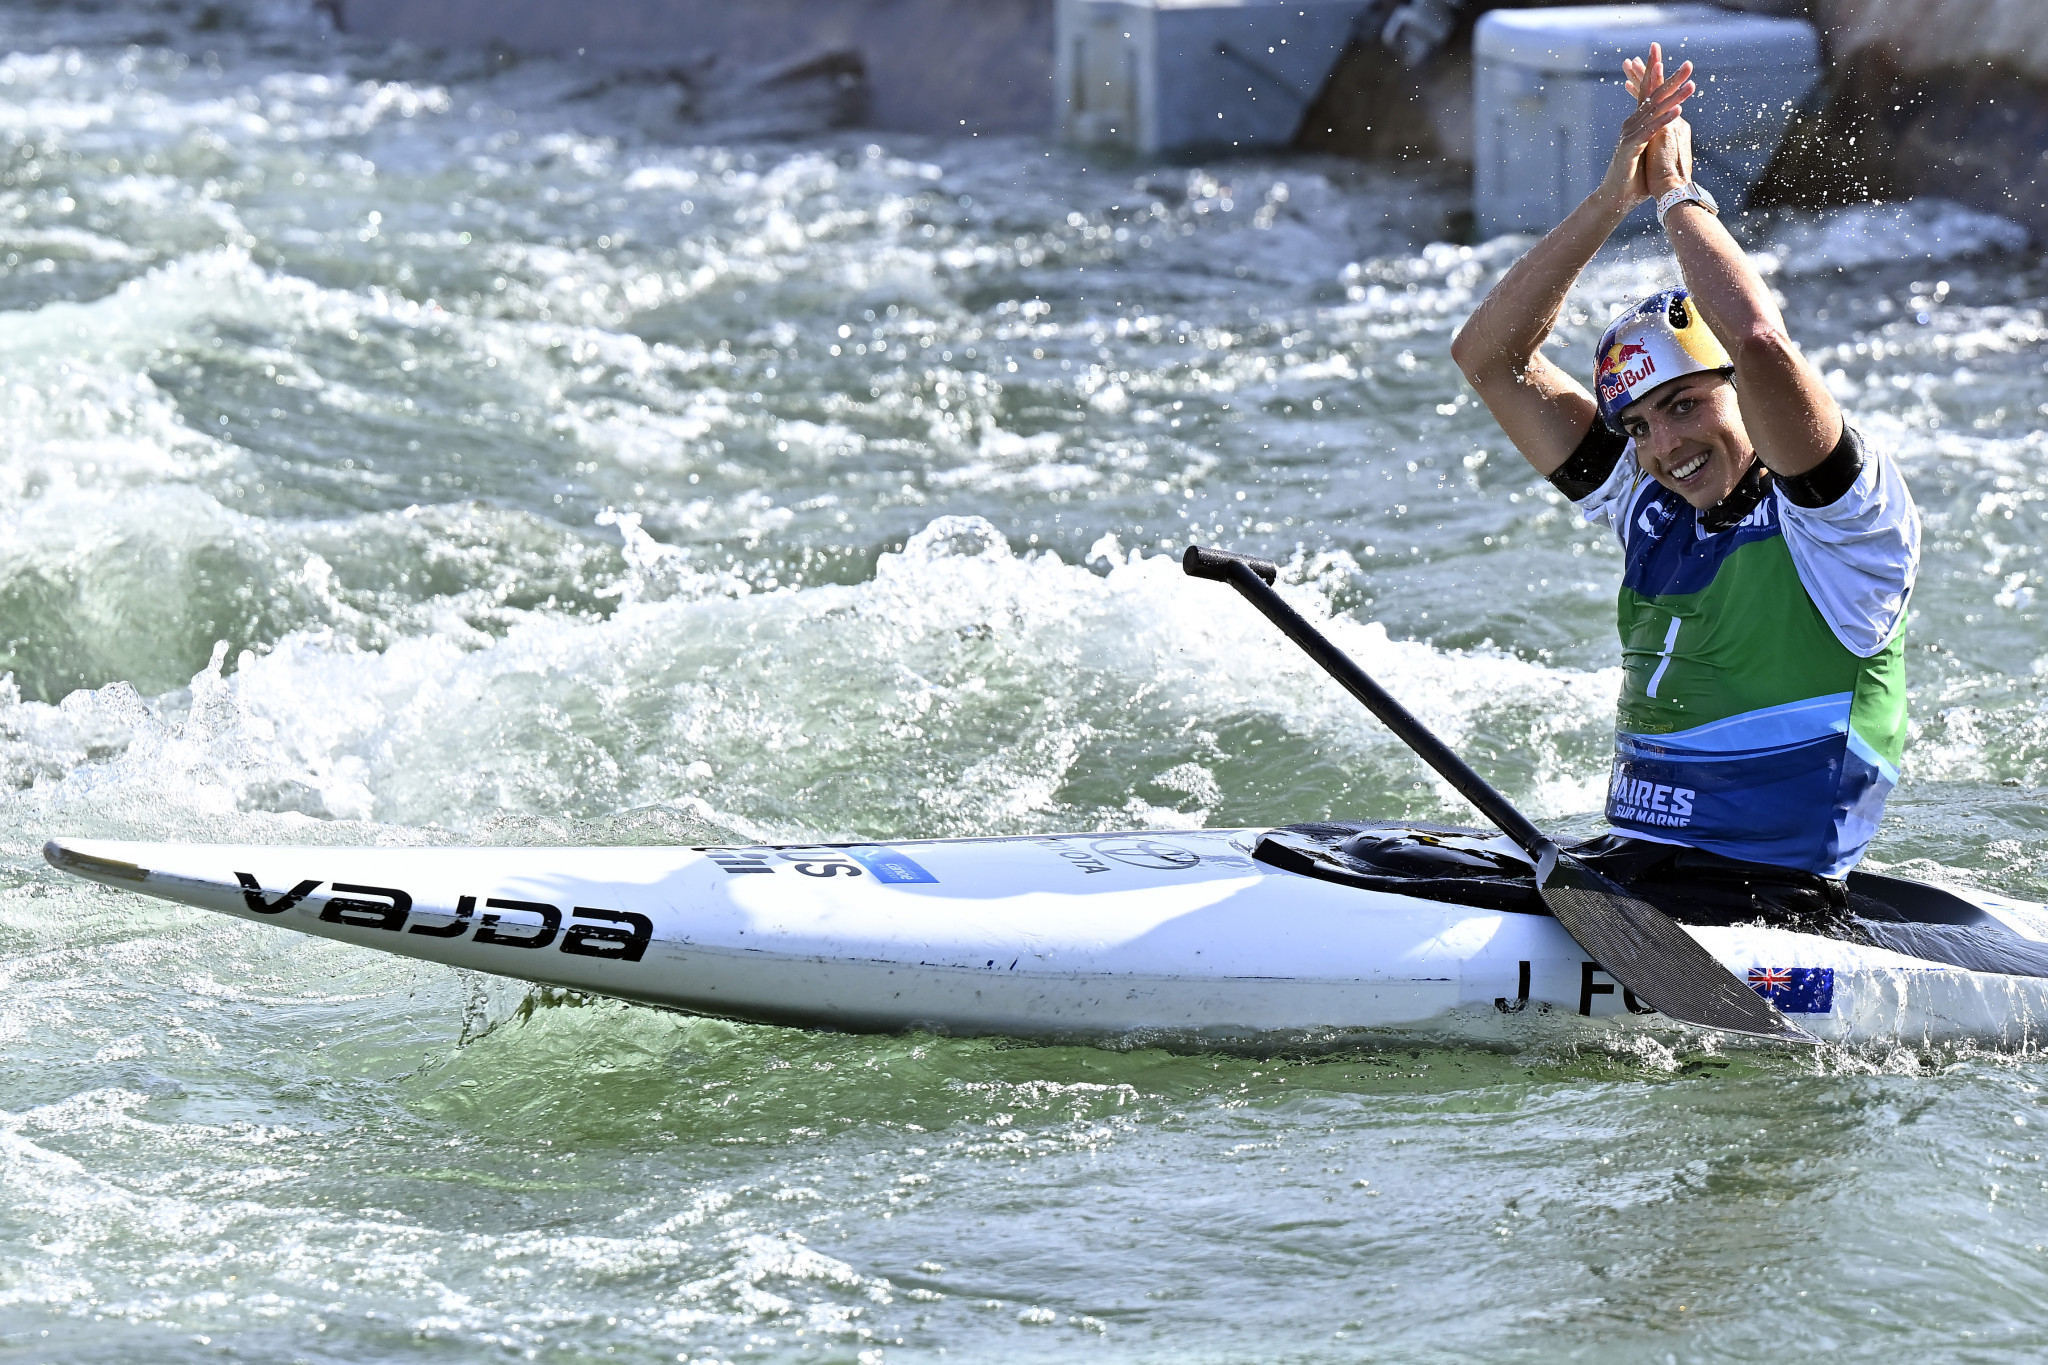 Australia's Jessica Fox won the canoe and kayak races at Paris 2024 venue Vaires-sur-Marne to seal both ICF Canoe Slalom World Cup titles ©Getty Images